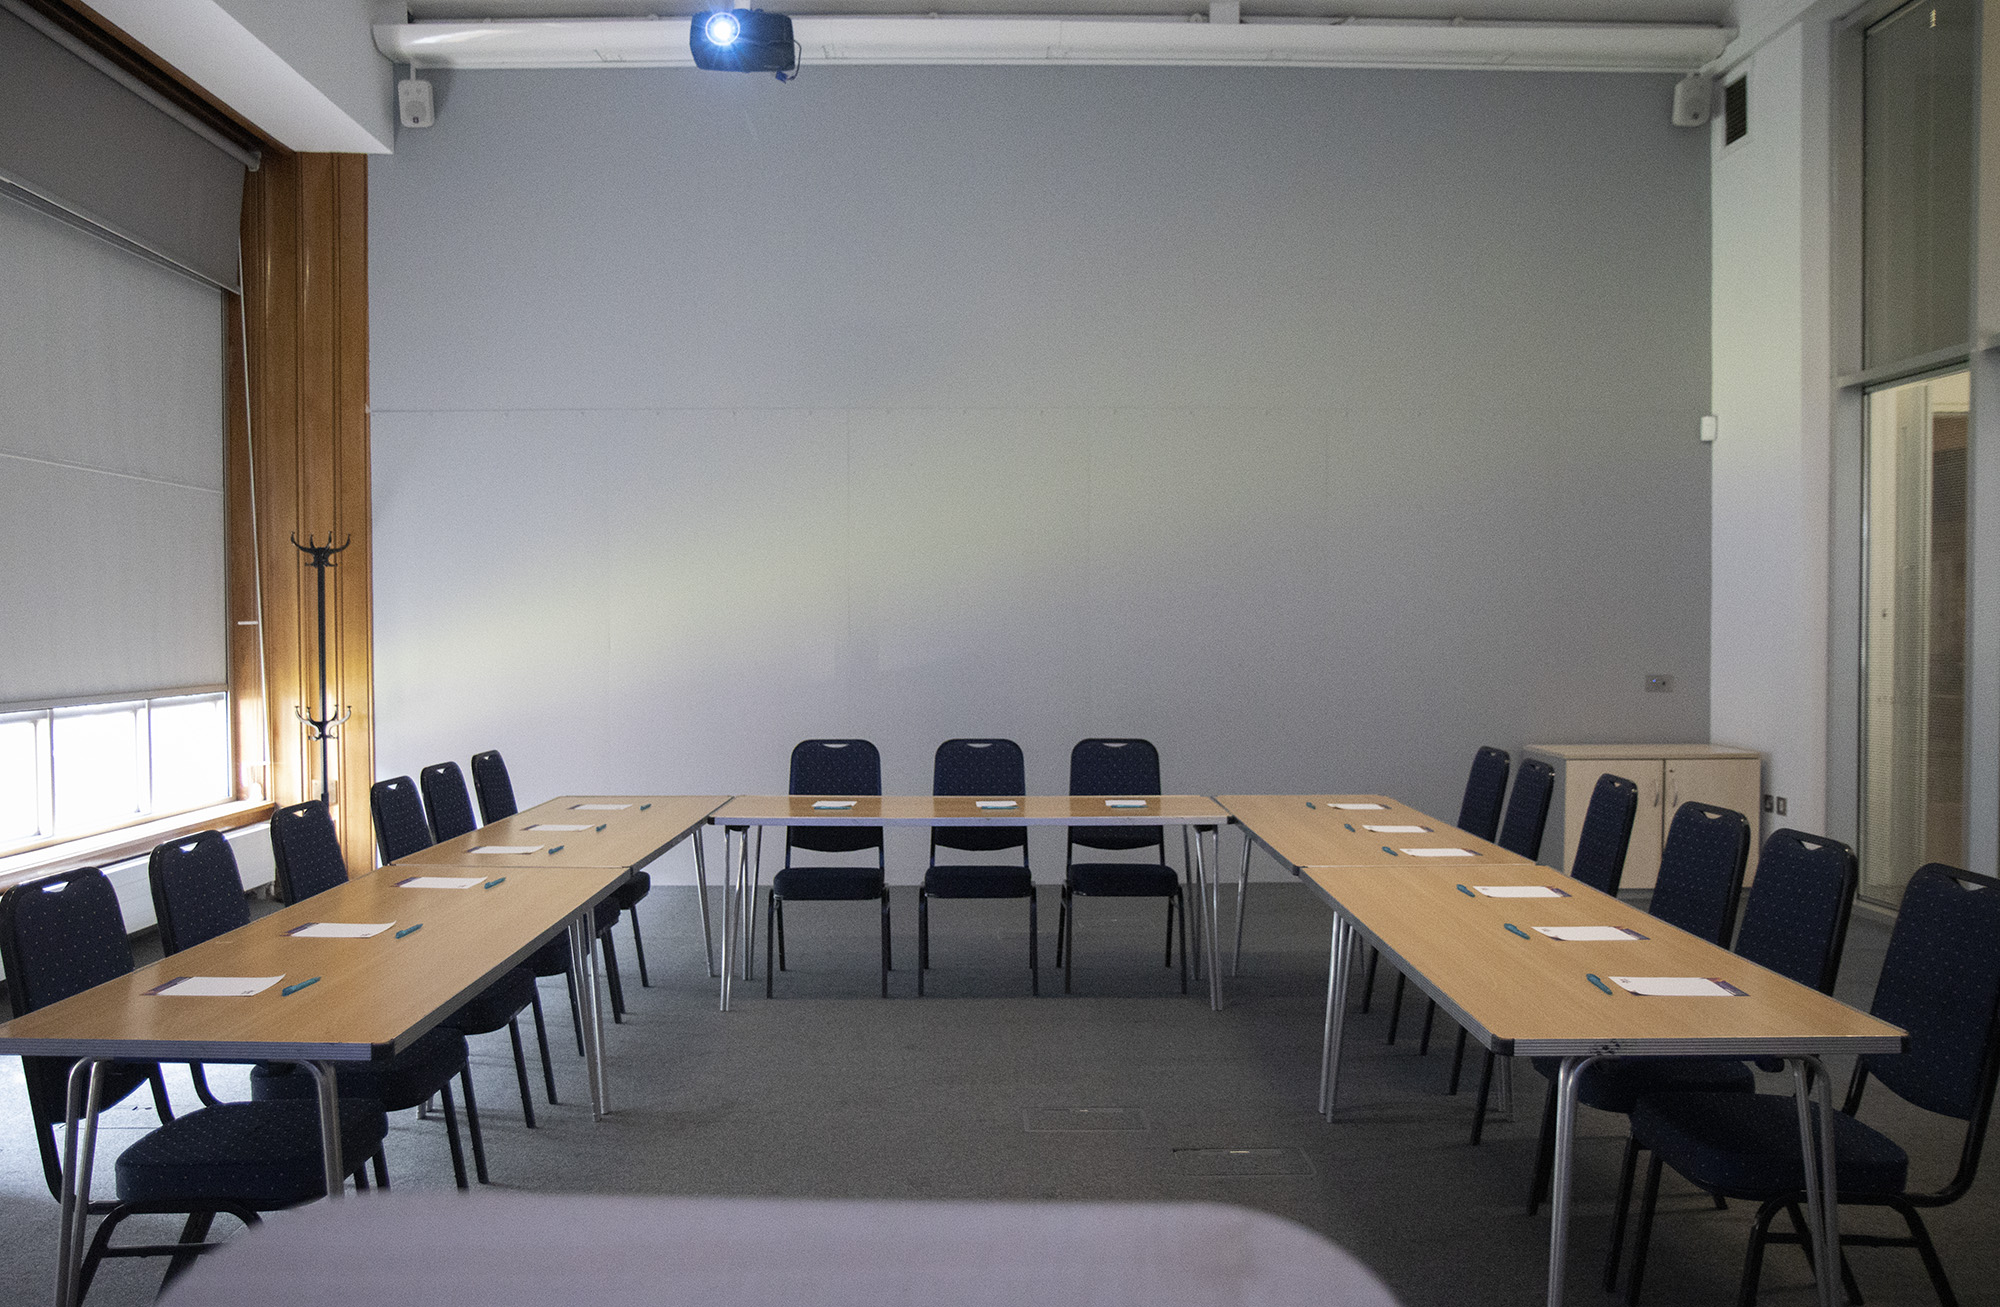 A photograph of Learning Space 2 set up for a meeting with 15 seats and a projector